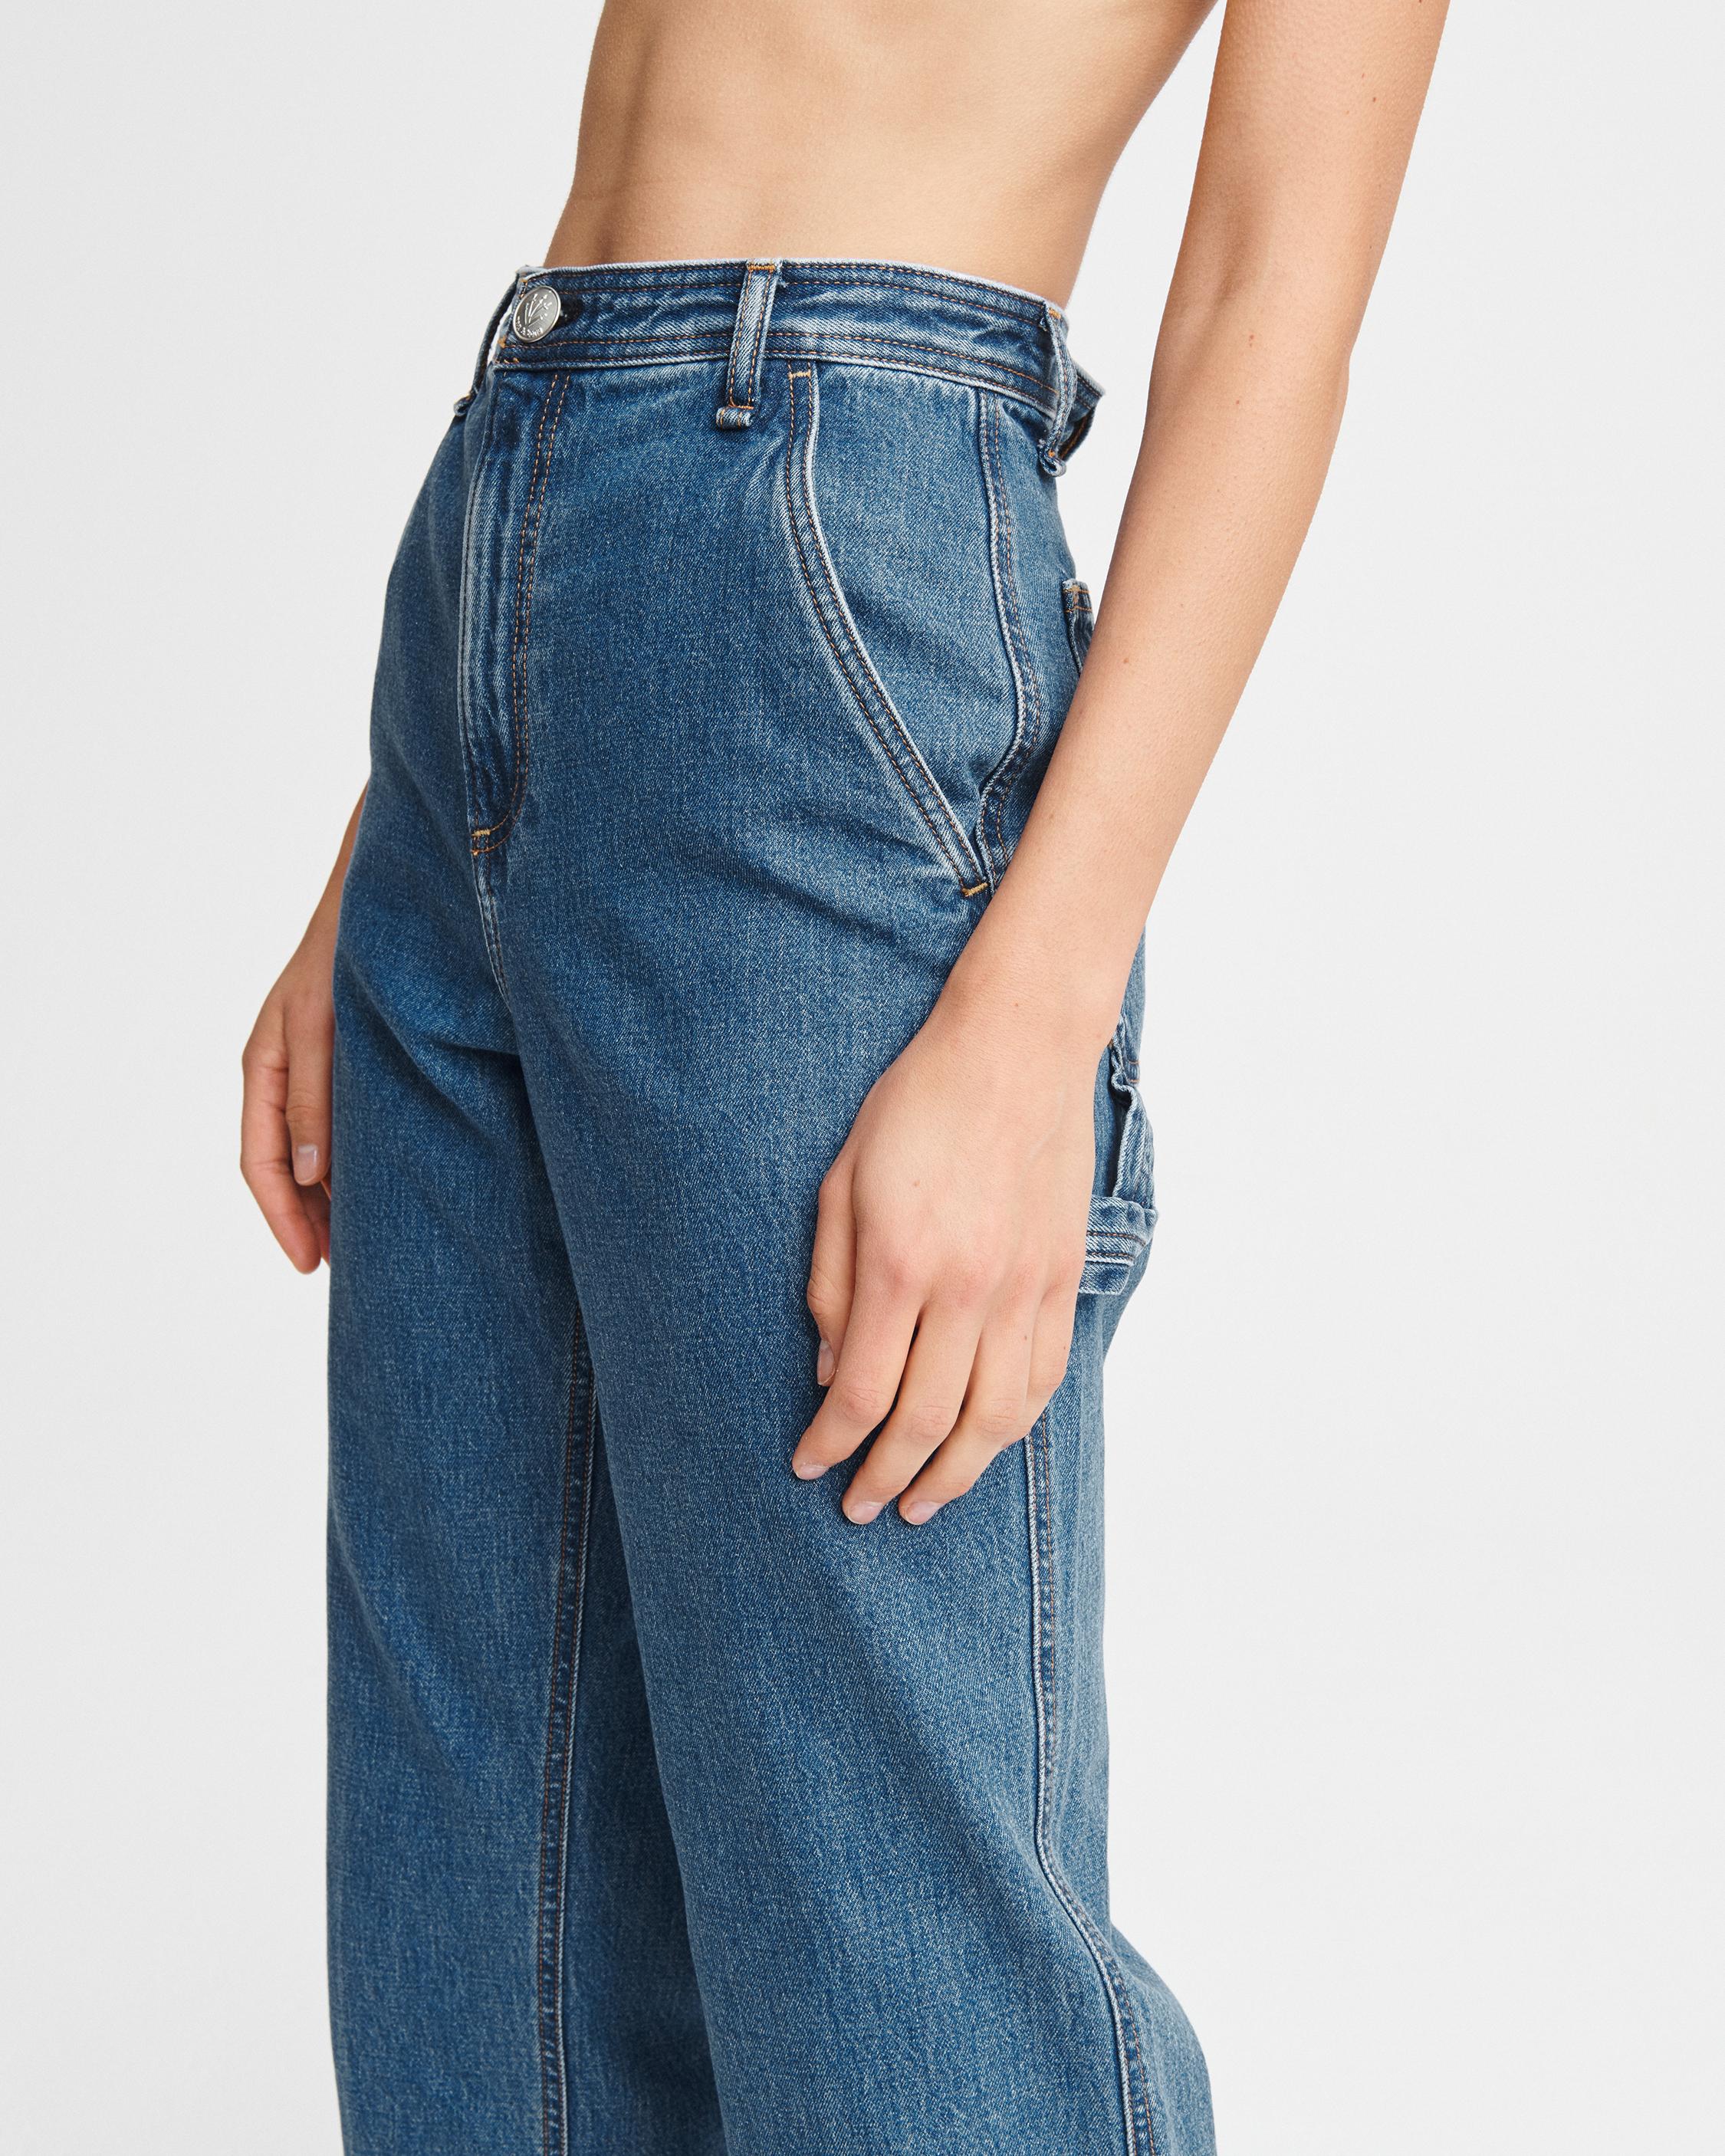 Ruth Super High-Rise Straight Leg Jeans in Bay Water